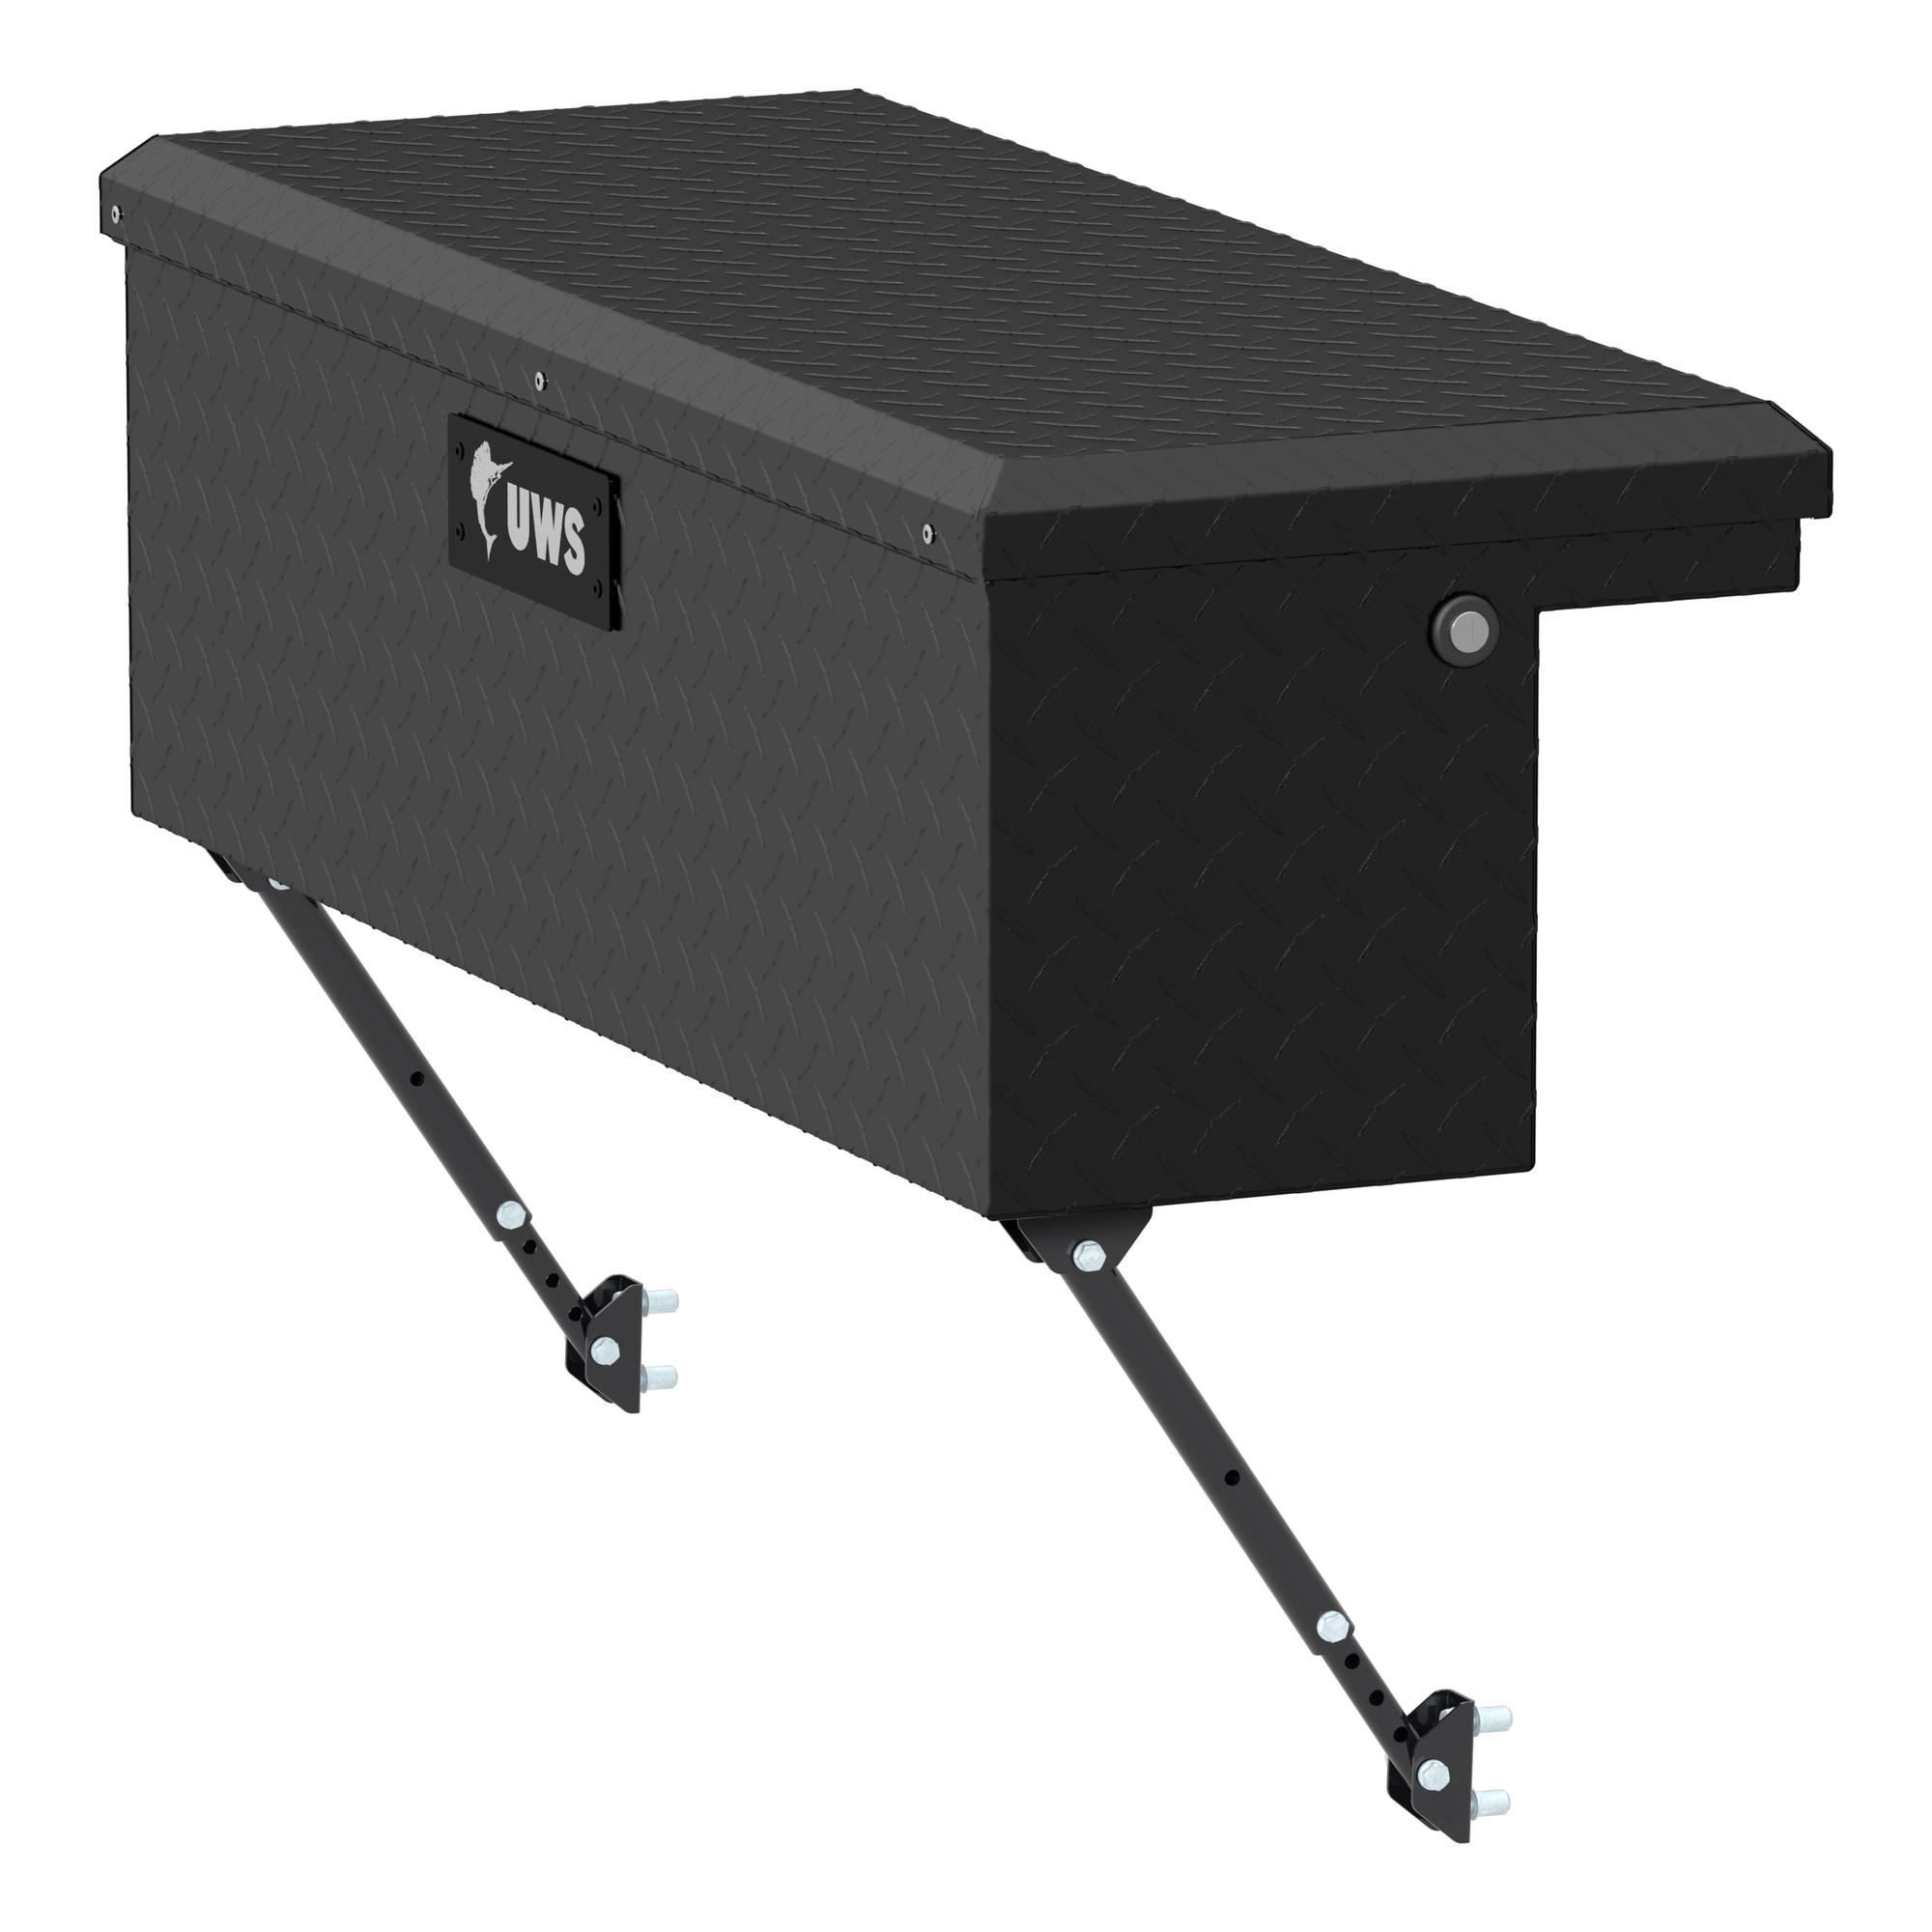 UWS, 36Inch Truck Side Tool Box with Low Profile, Width 36.875 in, Material Aluminum, Color Finish Matte Black, Model EC30363-MK2